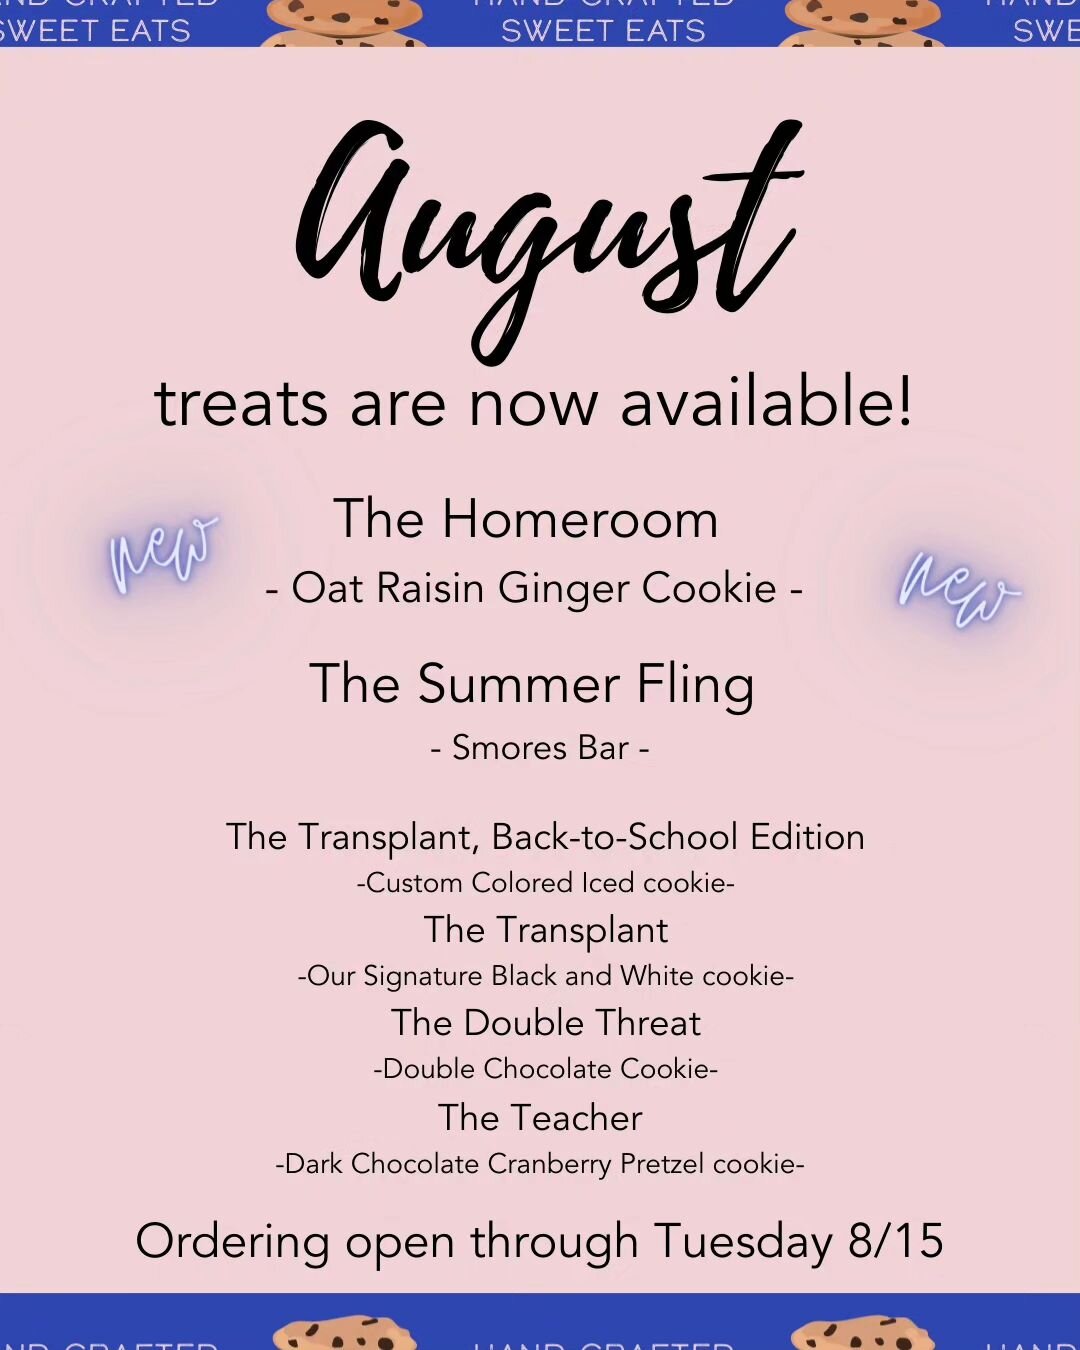 Now accepting orders for this month's treats through Tuesday 8/15.

*NEW* The Homeroom
Soft oatmeal with golden raisins and crystallized ginger

Orders delivered 8/19 or 8/20